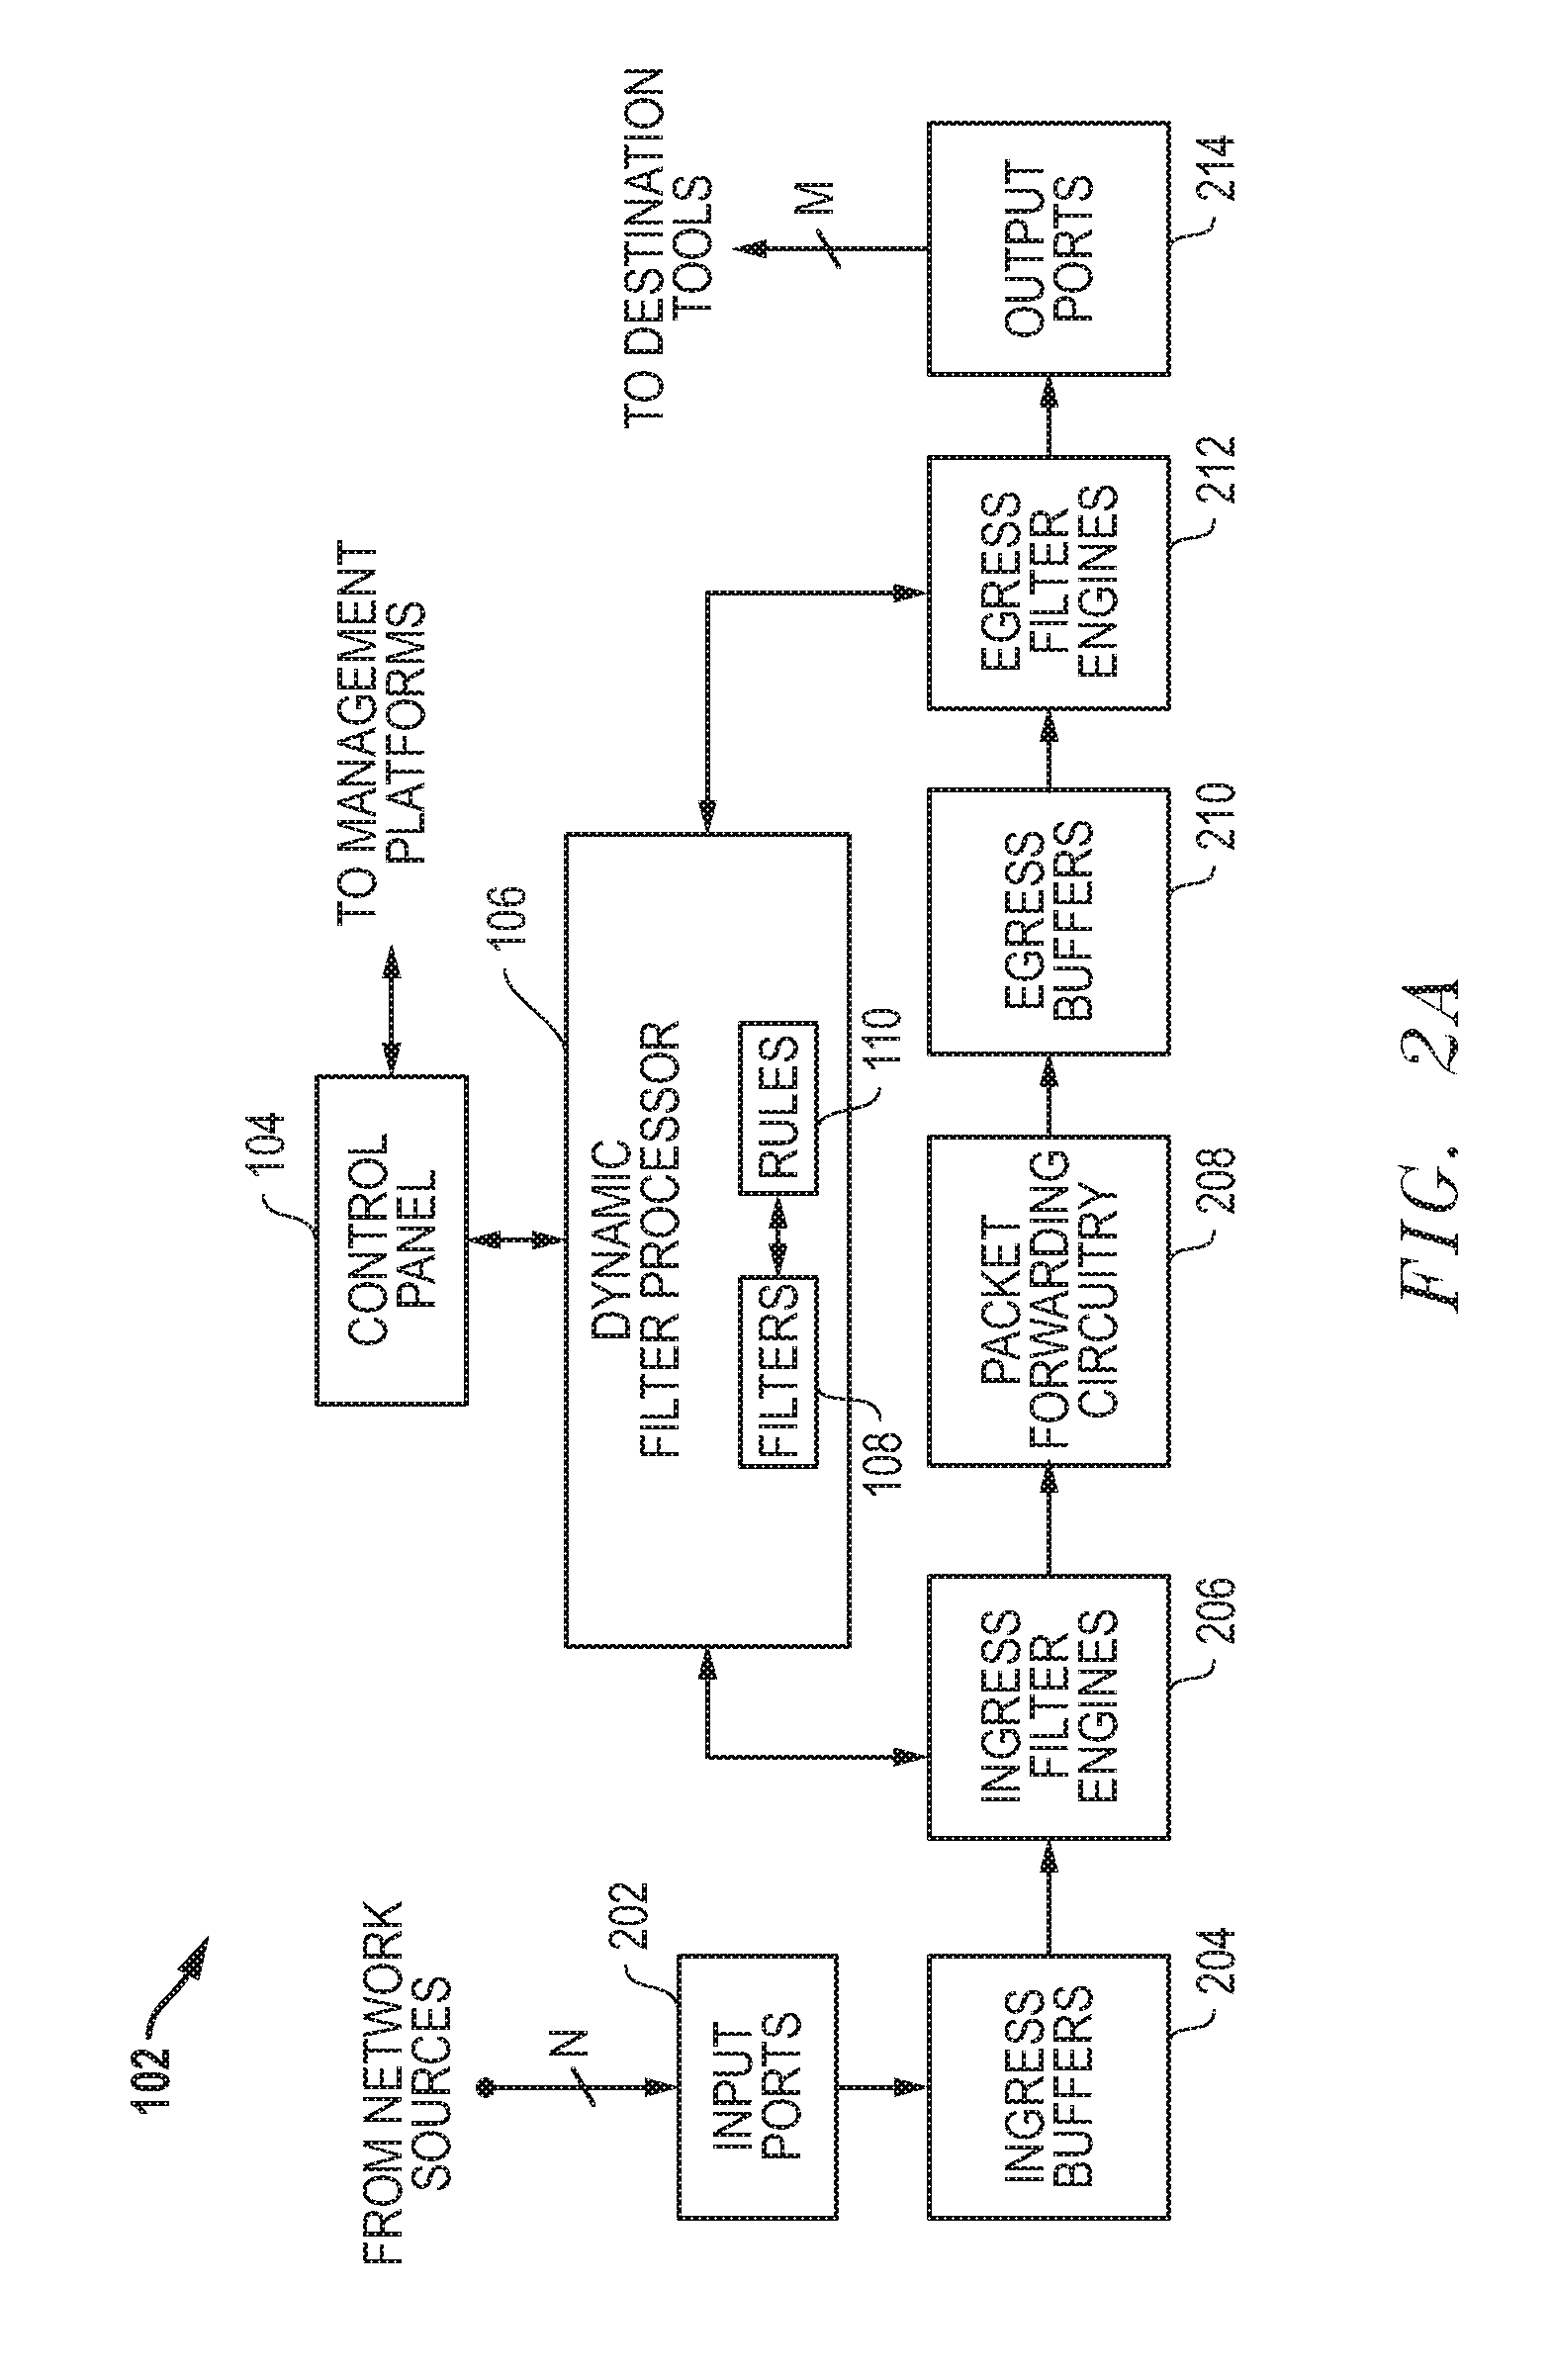 Superset packet forwarding for overlapping filters and related systems and methods